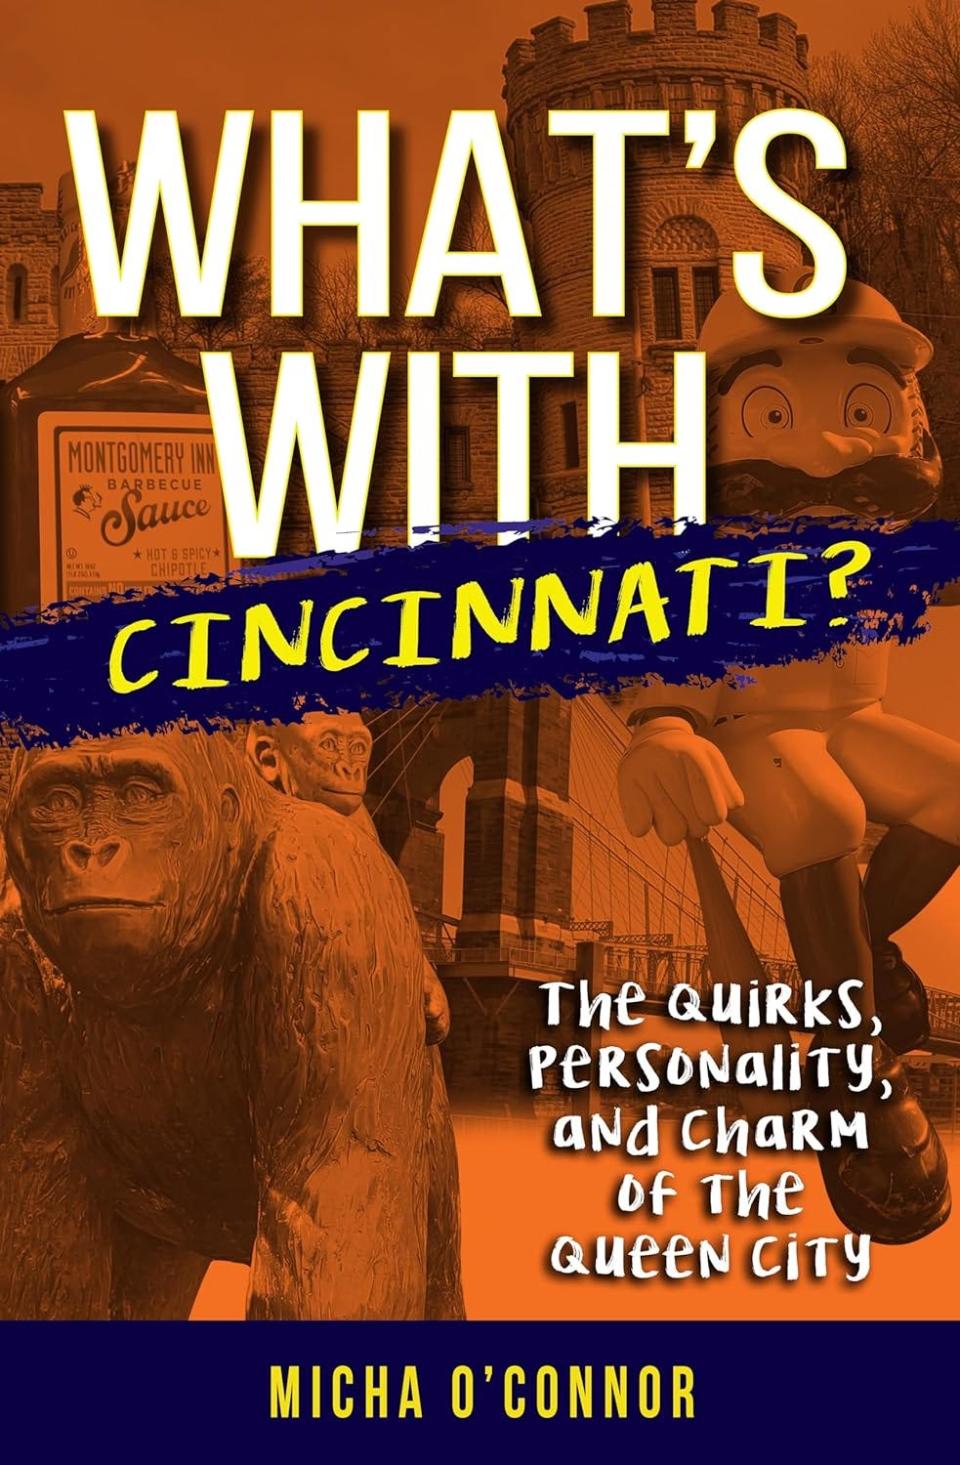 “What's With Cincinnati? The Quirks, Personality, and Charm of the Queen City” by Micha O’Connor explains what makes Cincinnati tick, from our favorite foods and local icons to the way we talk.